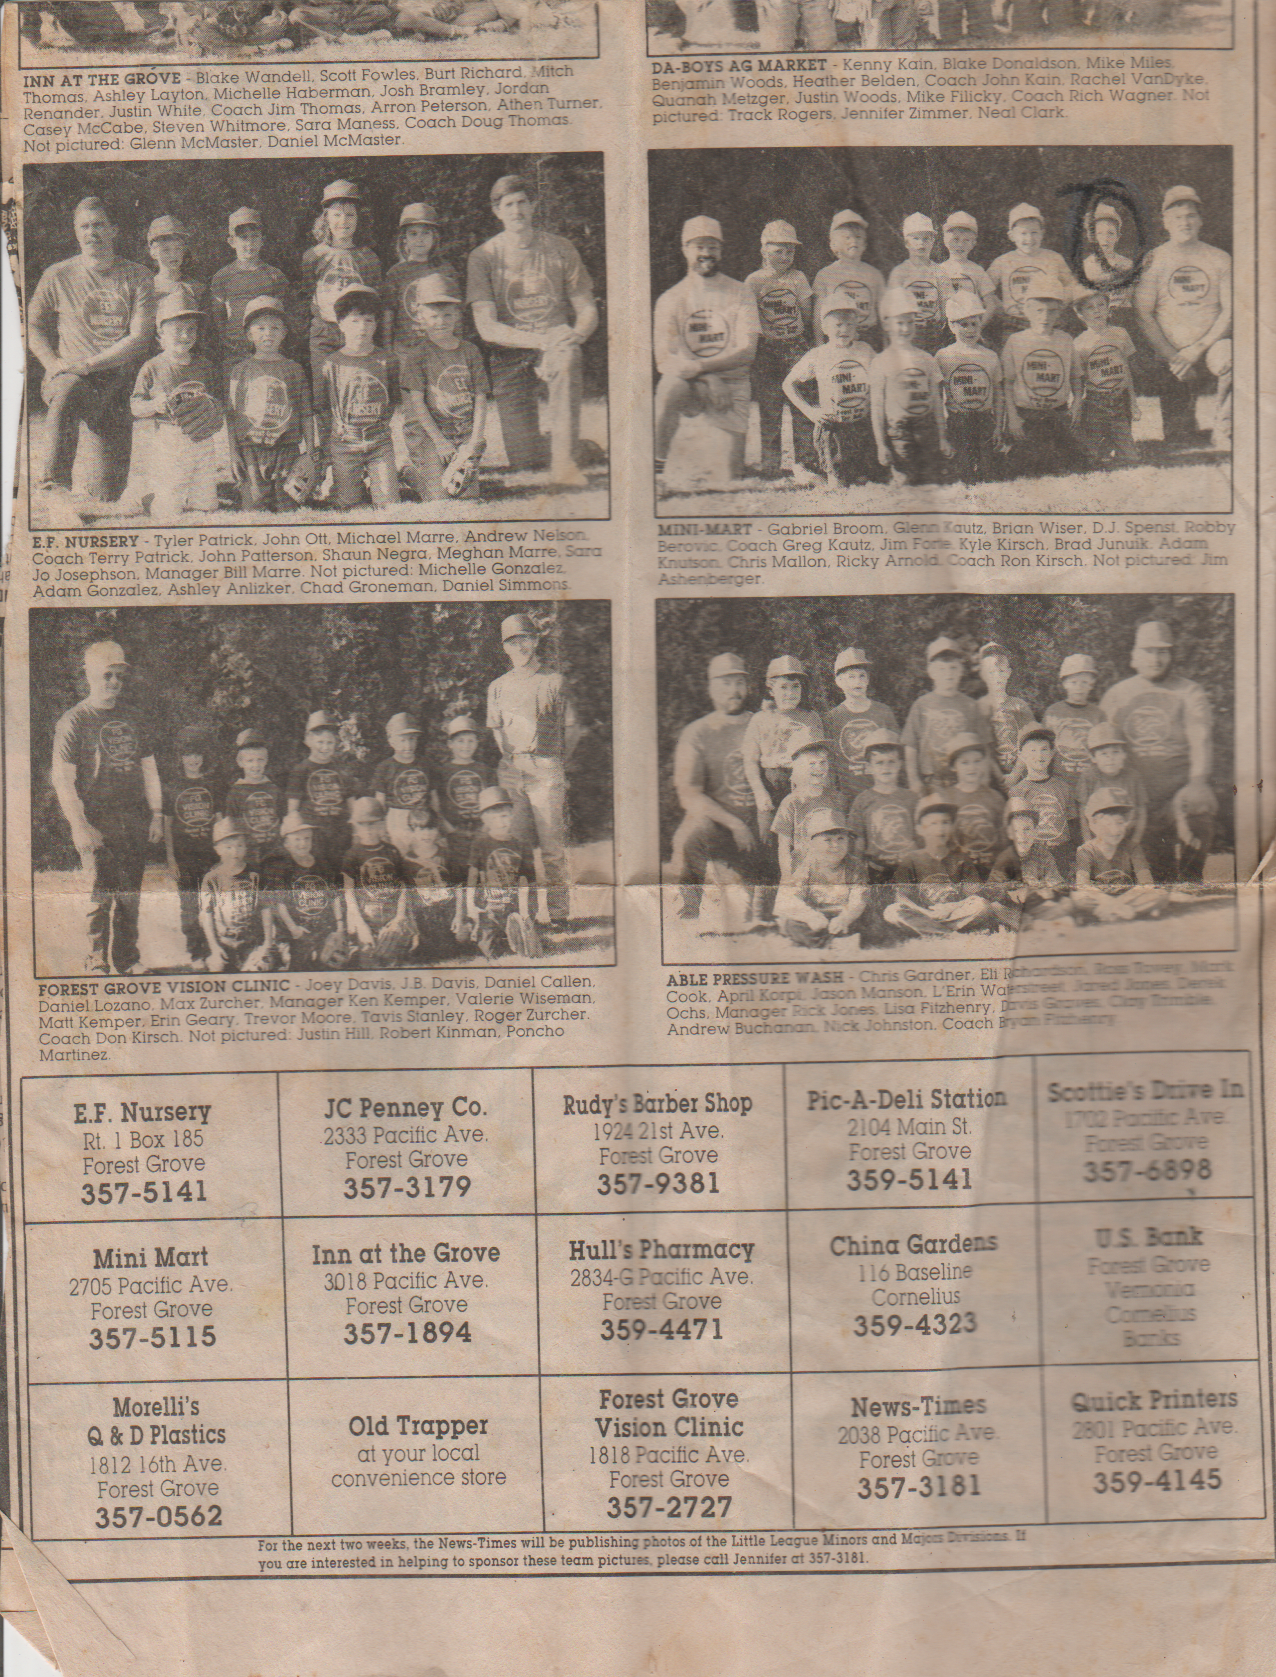 1989-06-14 - Wednesday - Rick in Baseball or T-Ball - News-Times-2.png